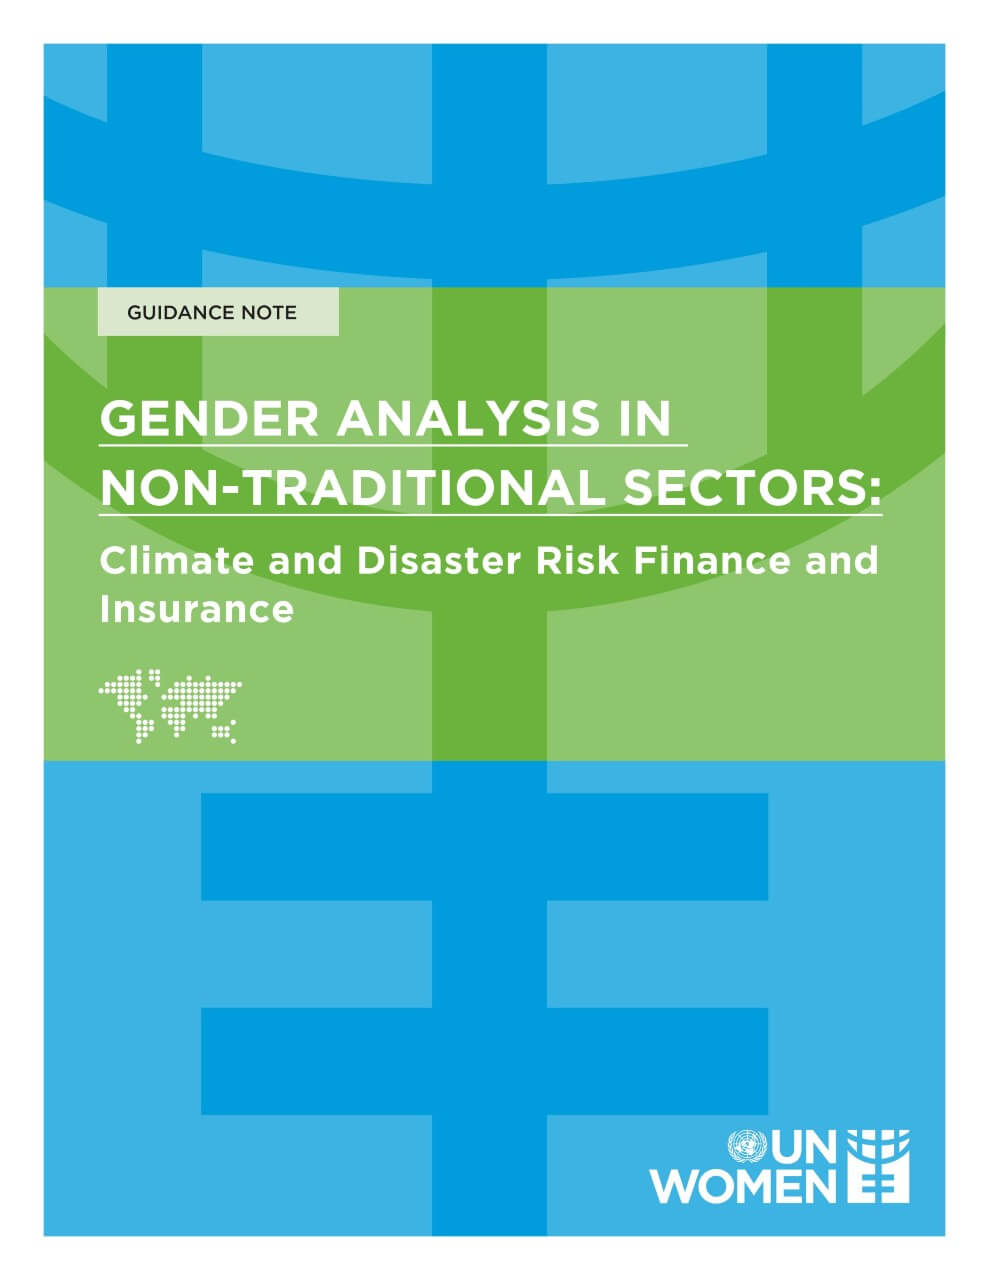 Gender analysis in non-traditional sectors: Climate and disaster risk finance and insurance